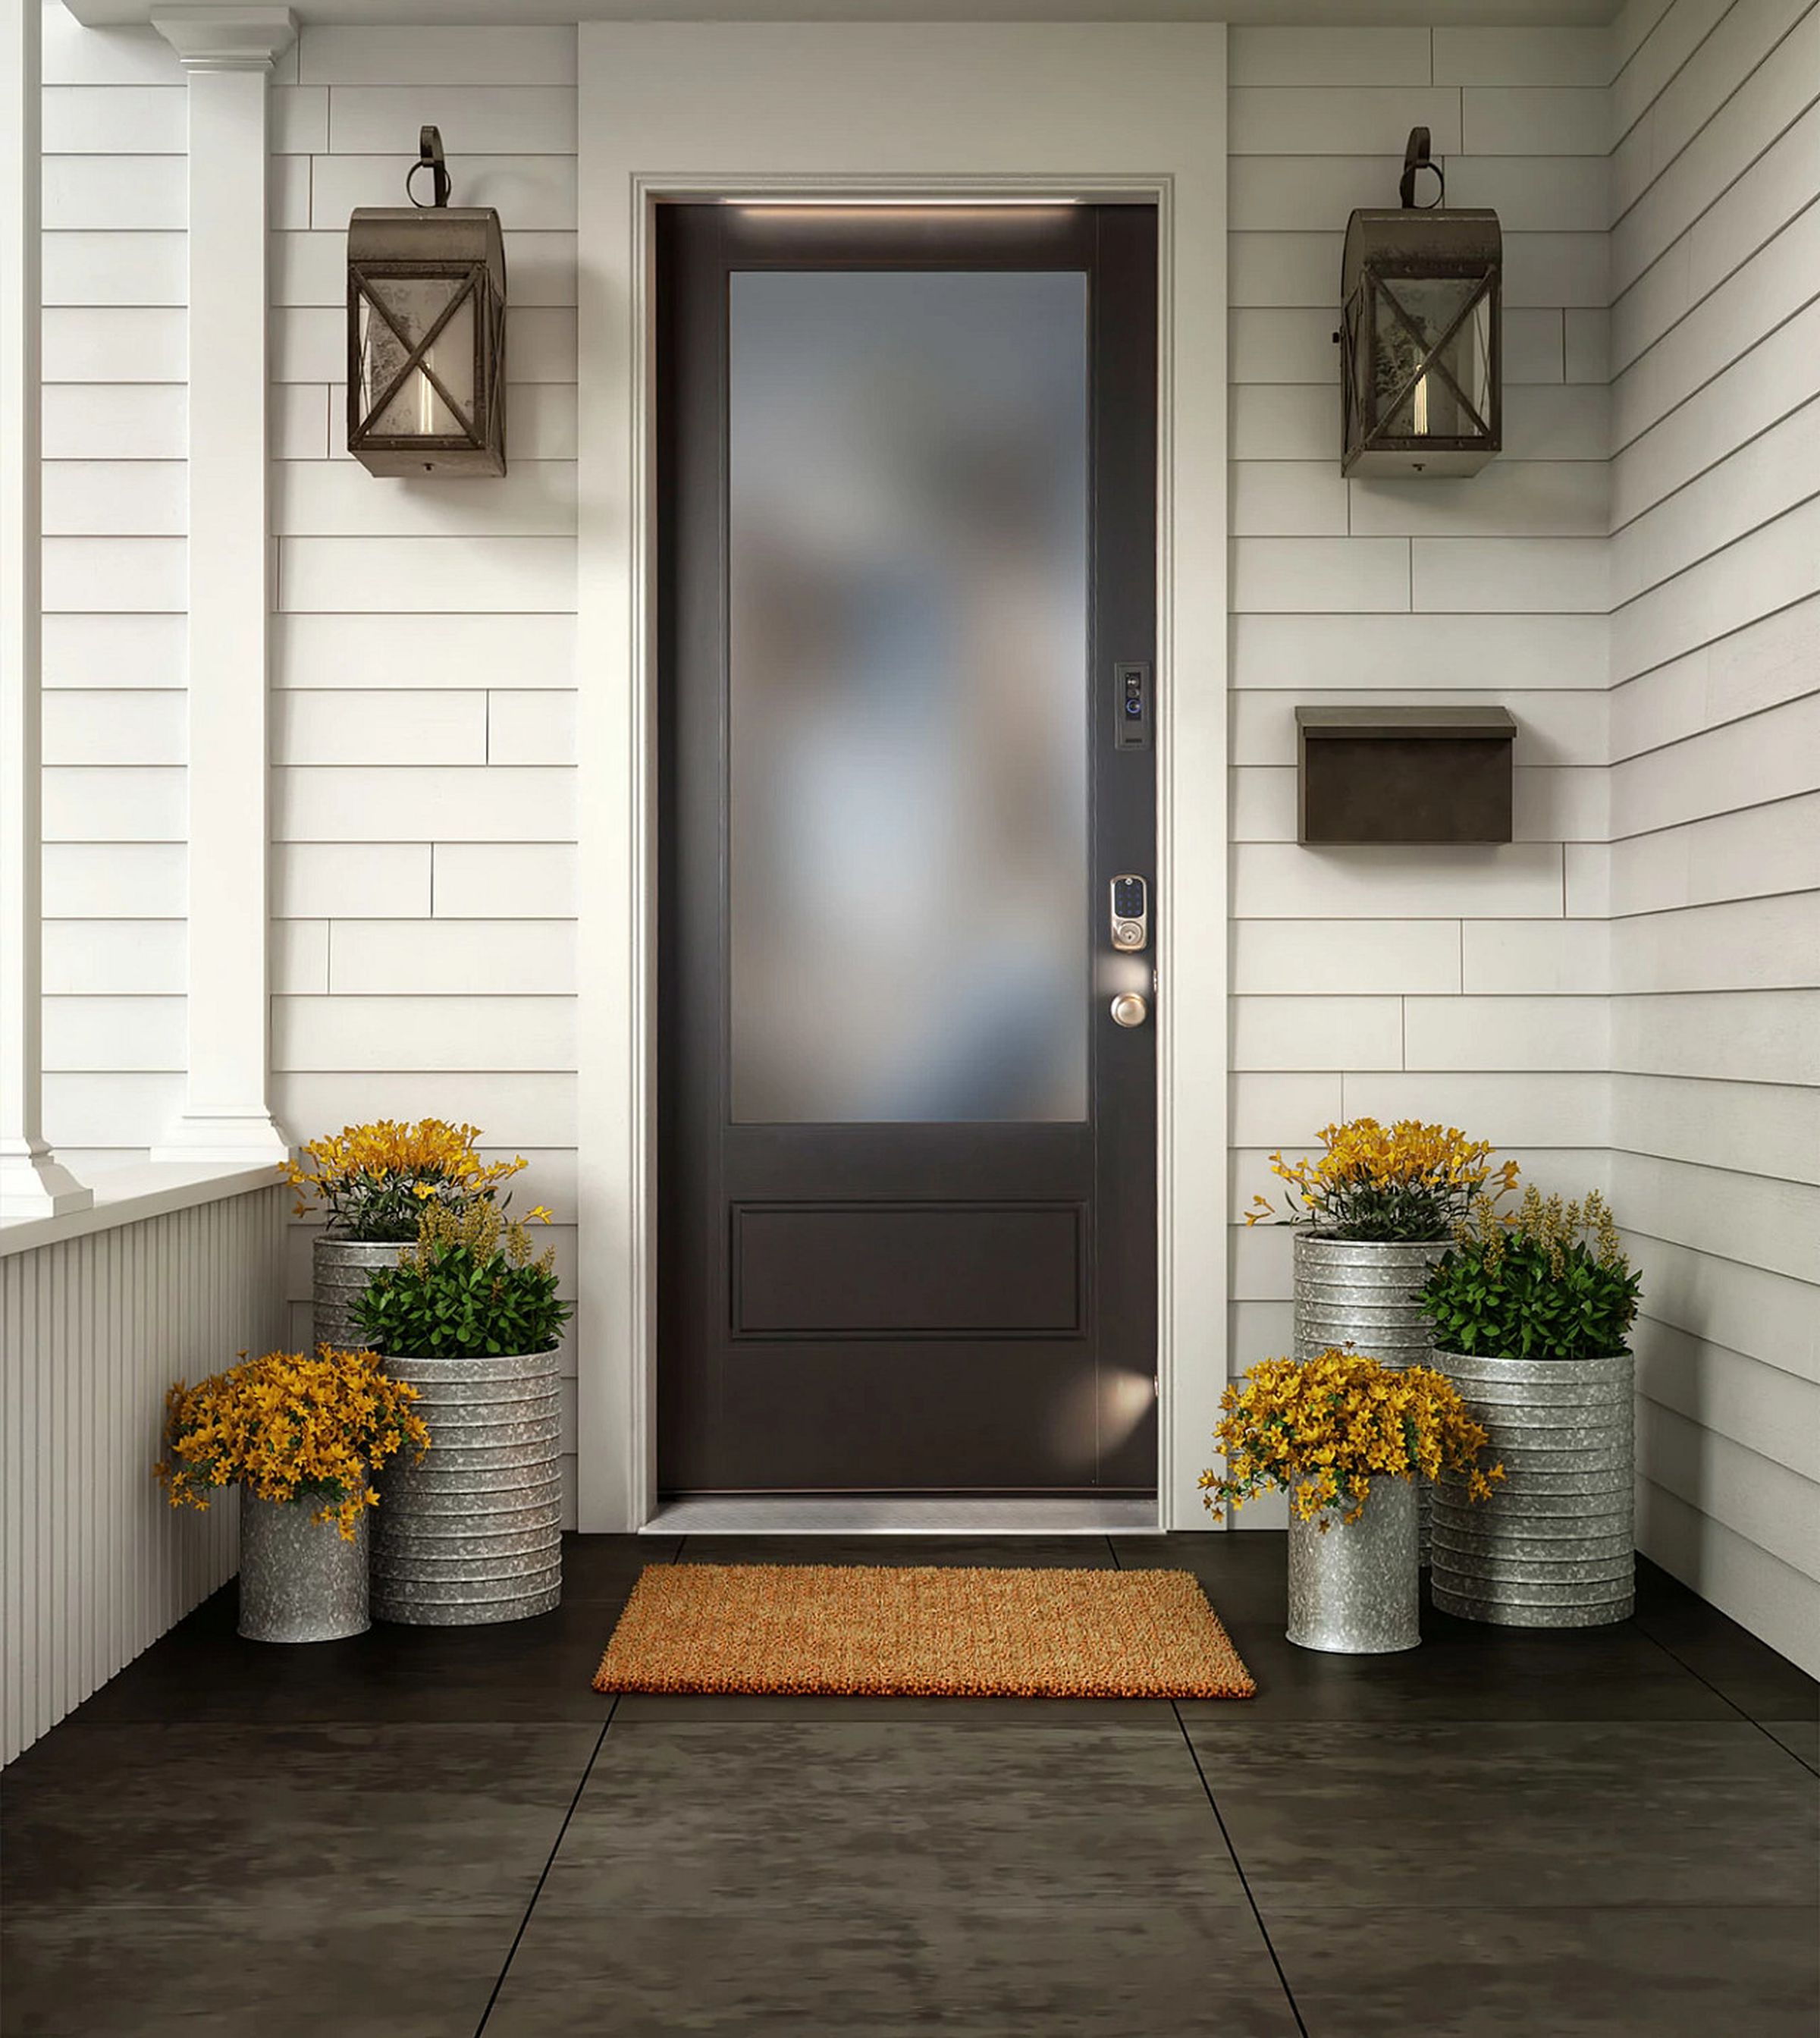 The Masonite smart door features strategically situated motion-activated lighting alongside a Yale door lock and Ring video doorbell.